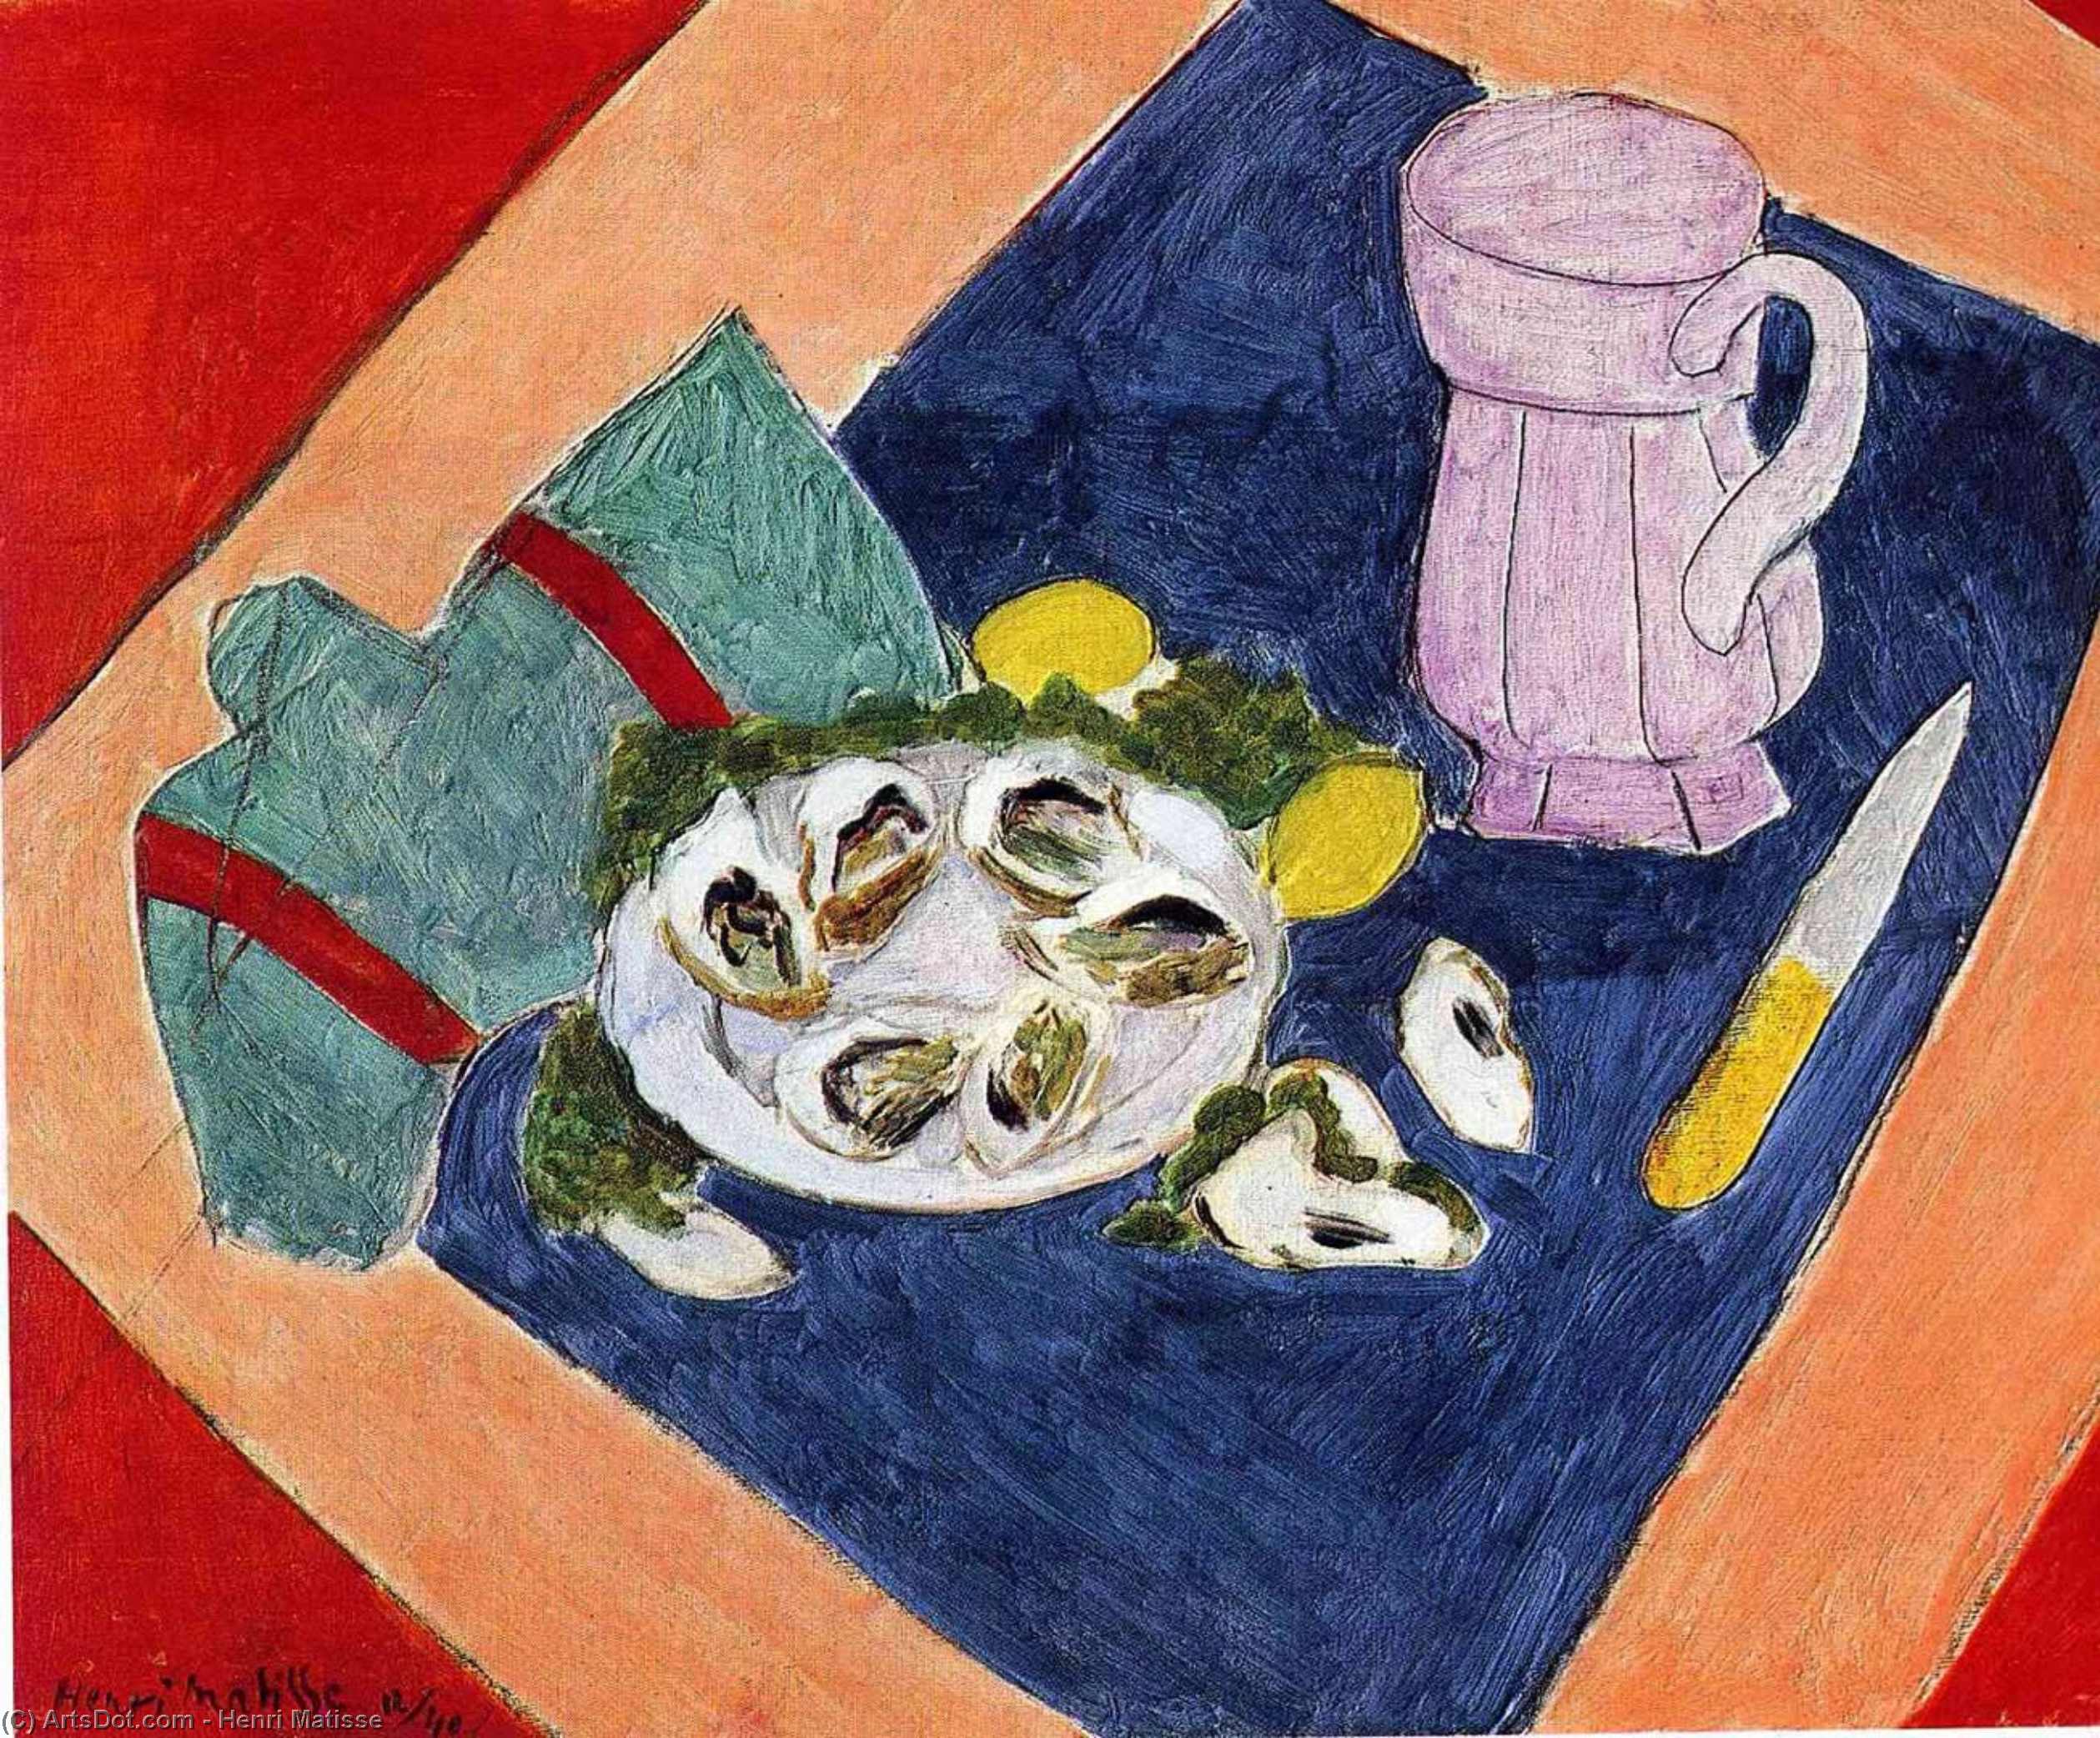 WikiOO.org - 백과 사전 - 회화, 삽화 Henri Matisse - Still Life with Oysters